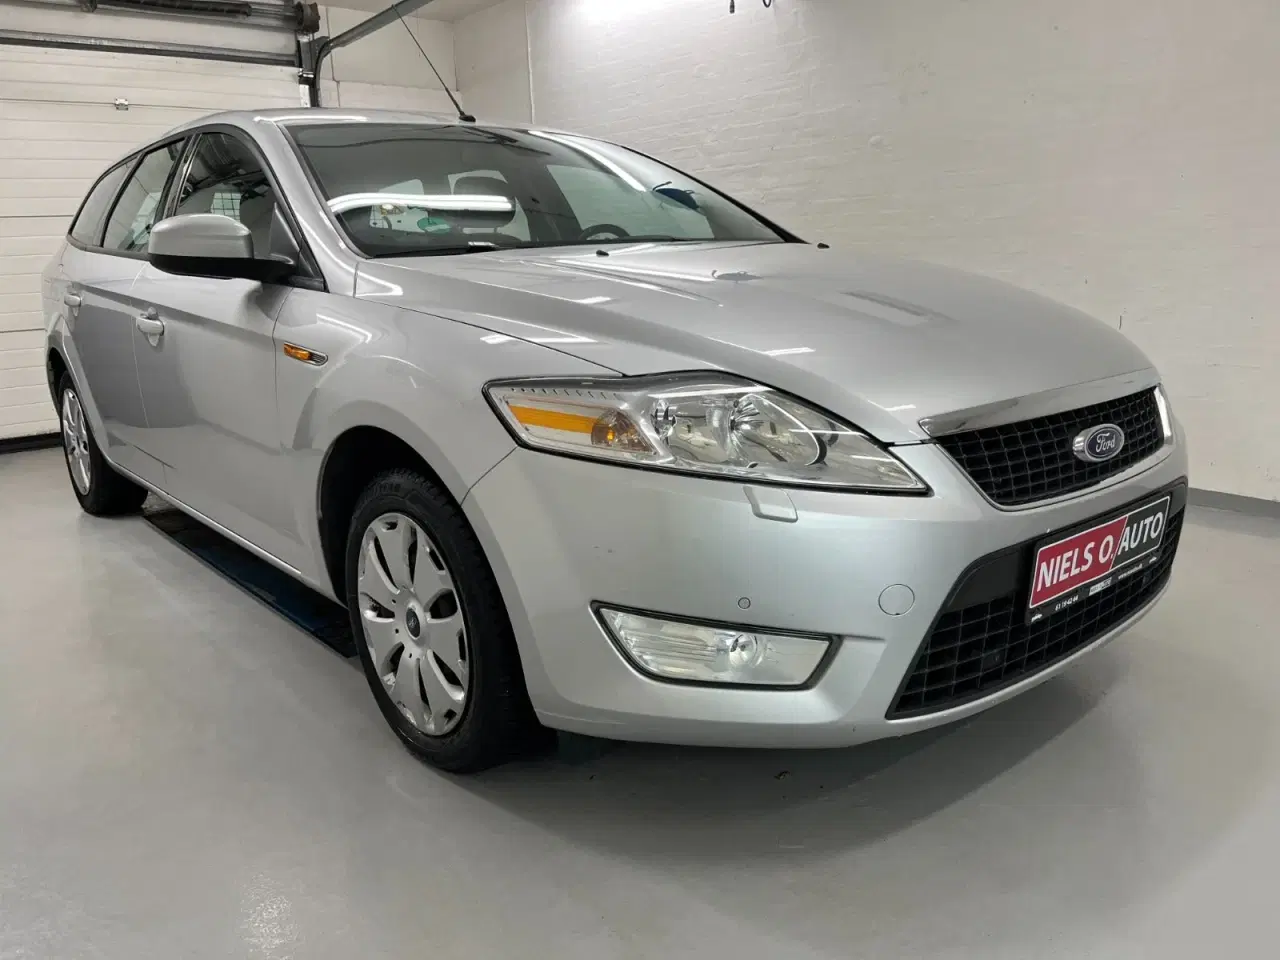 Billede 2 - Ford Mondeo 2,0 TDCi 140 Trend Collection stc.